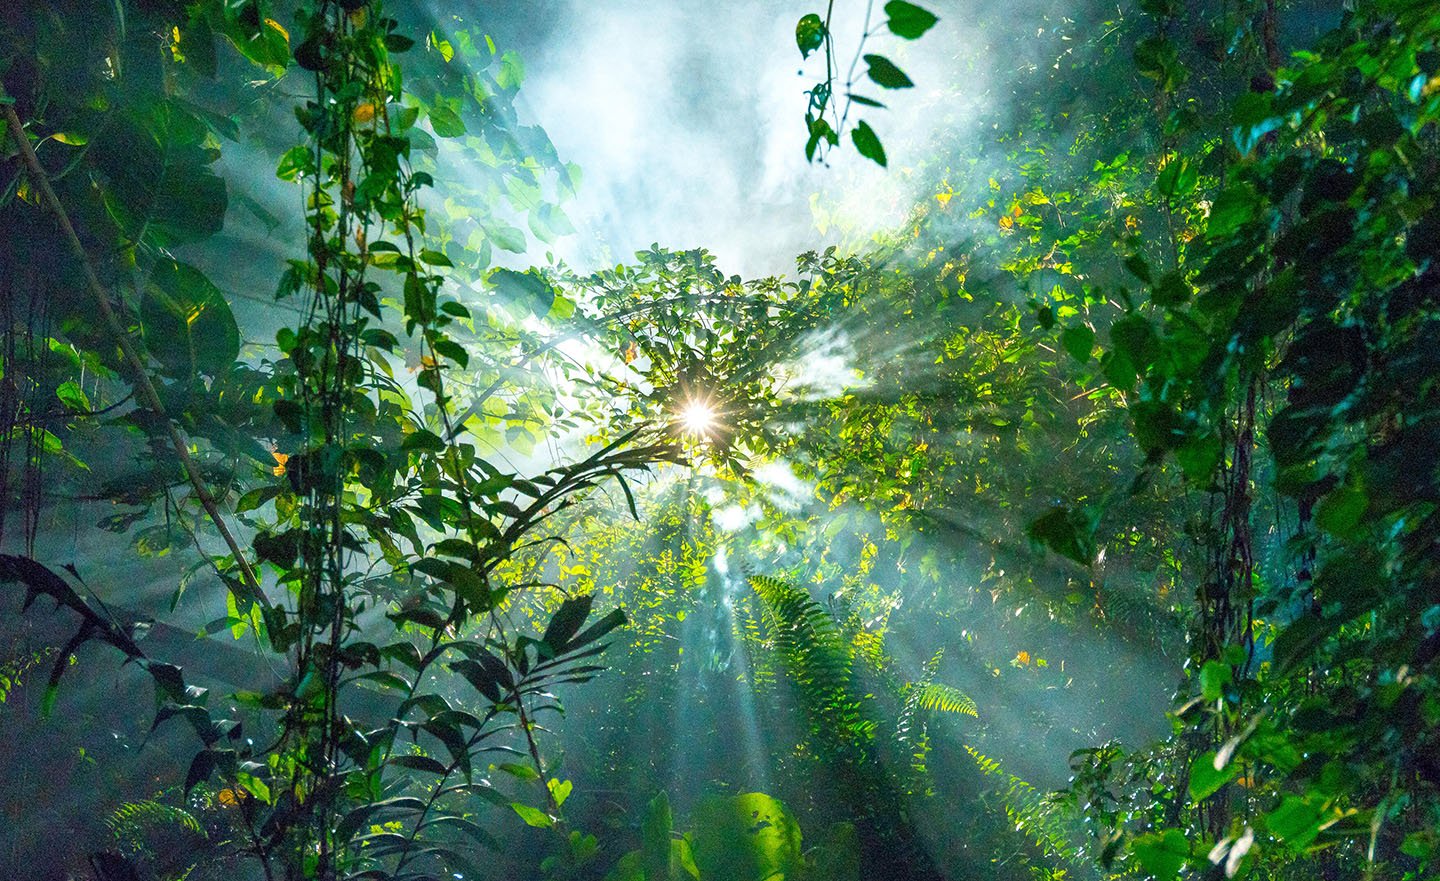 Sun beams penetrate the  rain forest from above creating a circular effect in the deep green vegetation in Kuala Lumpur, Malaysia